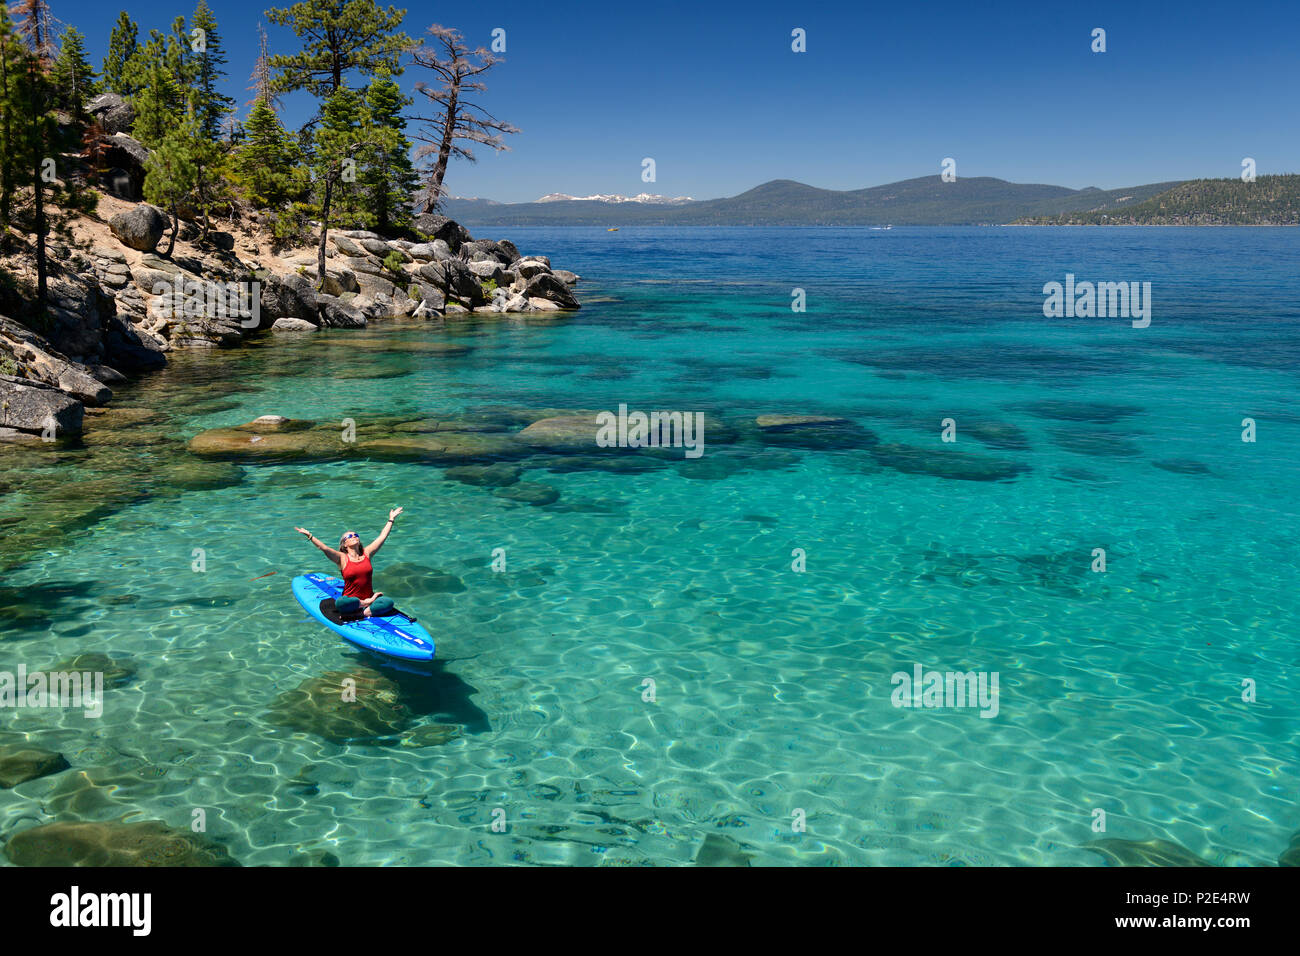 Woman stand up paddle boarding on the crystal clear blue waters of Lake Tahoe in Incline Village, Nevada, North America. Stock Photo